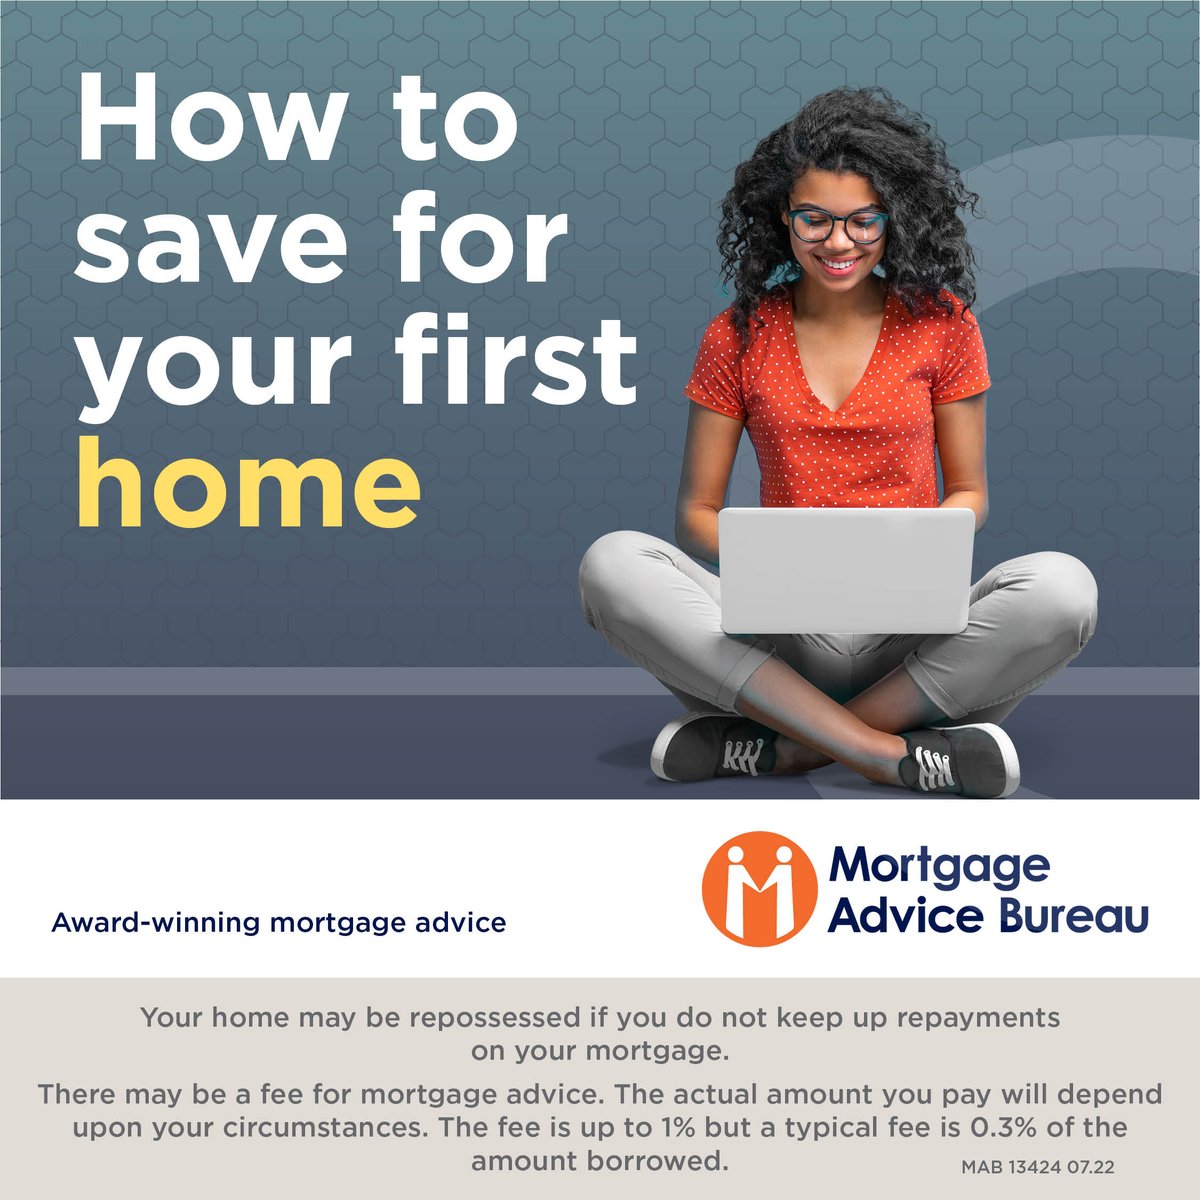 While it may seem impossible to save up enough for a deposit, there are lots of things you can do to help you buy a house sooner than you think. Whether you’ve only just started saving or you are ready to buy your first home, getting expert mortgage advice can be invaluable.